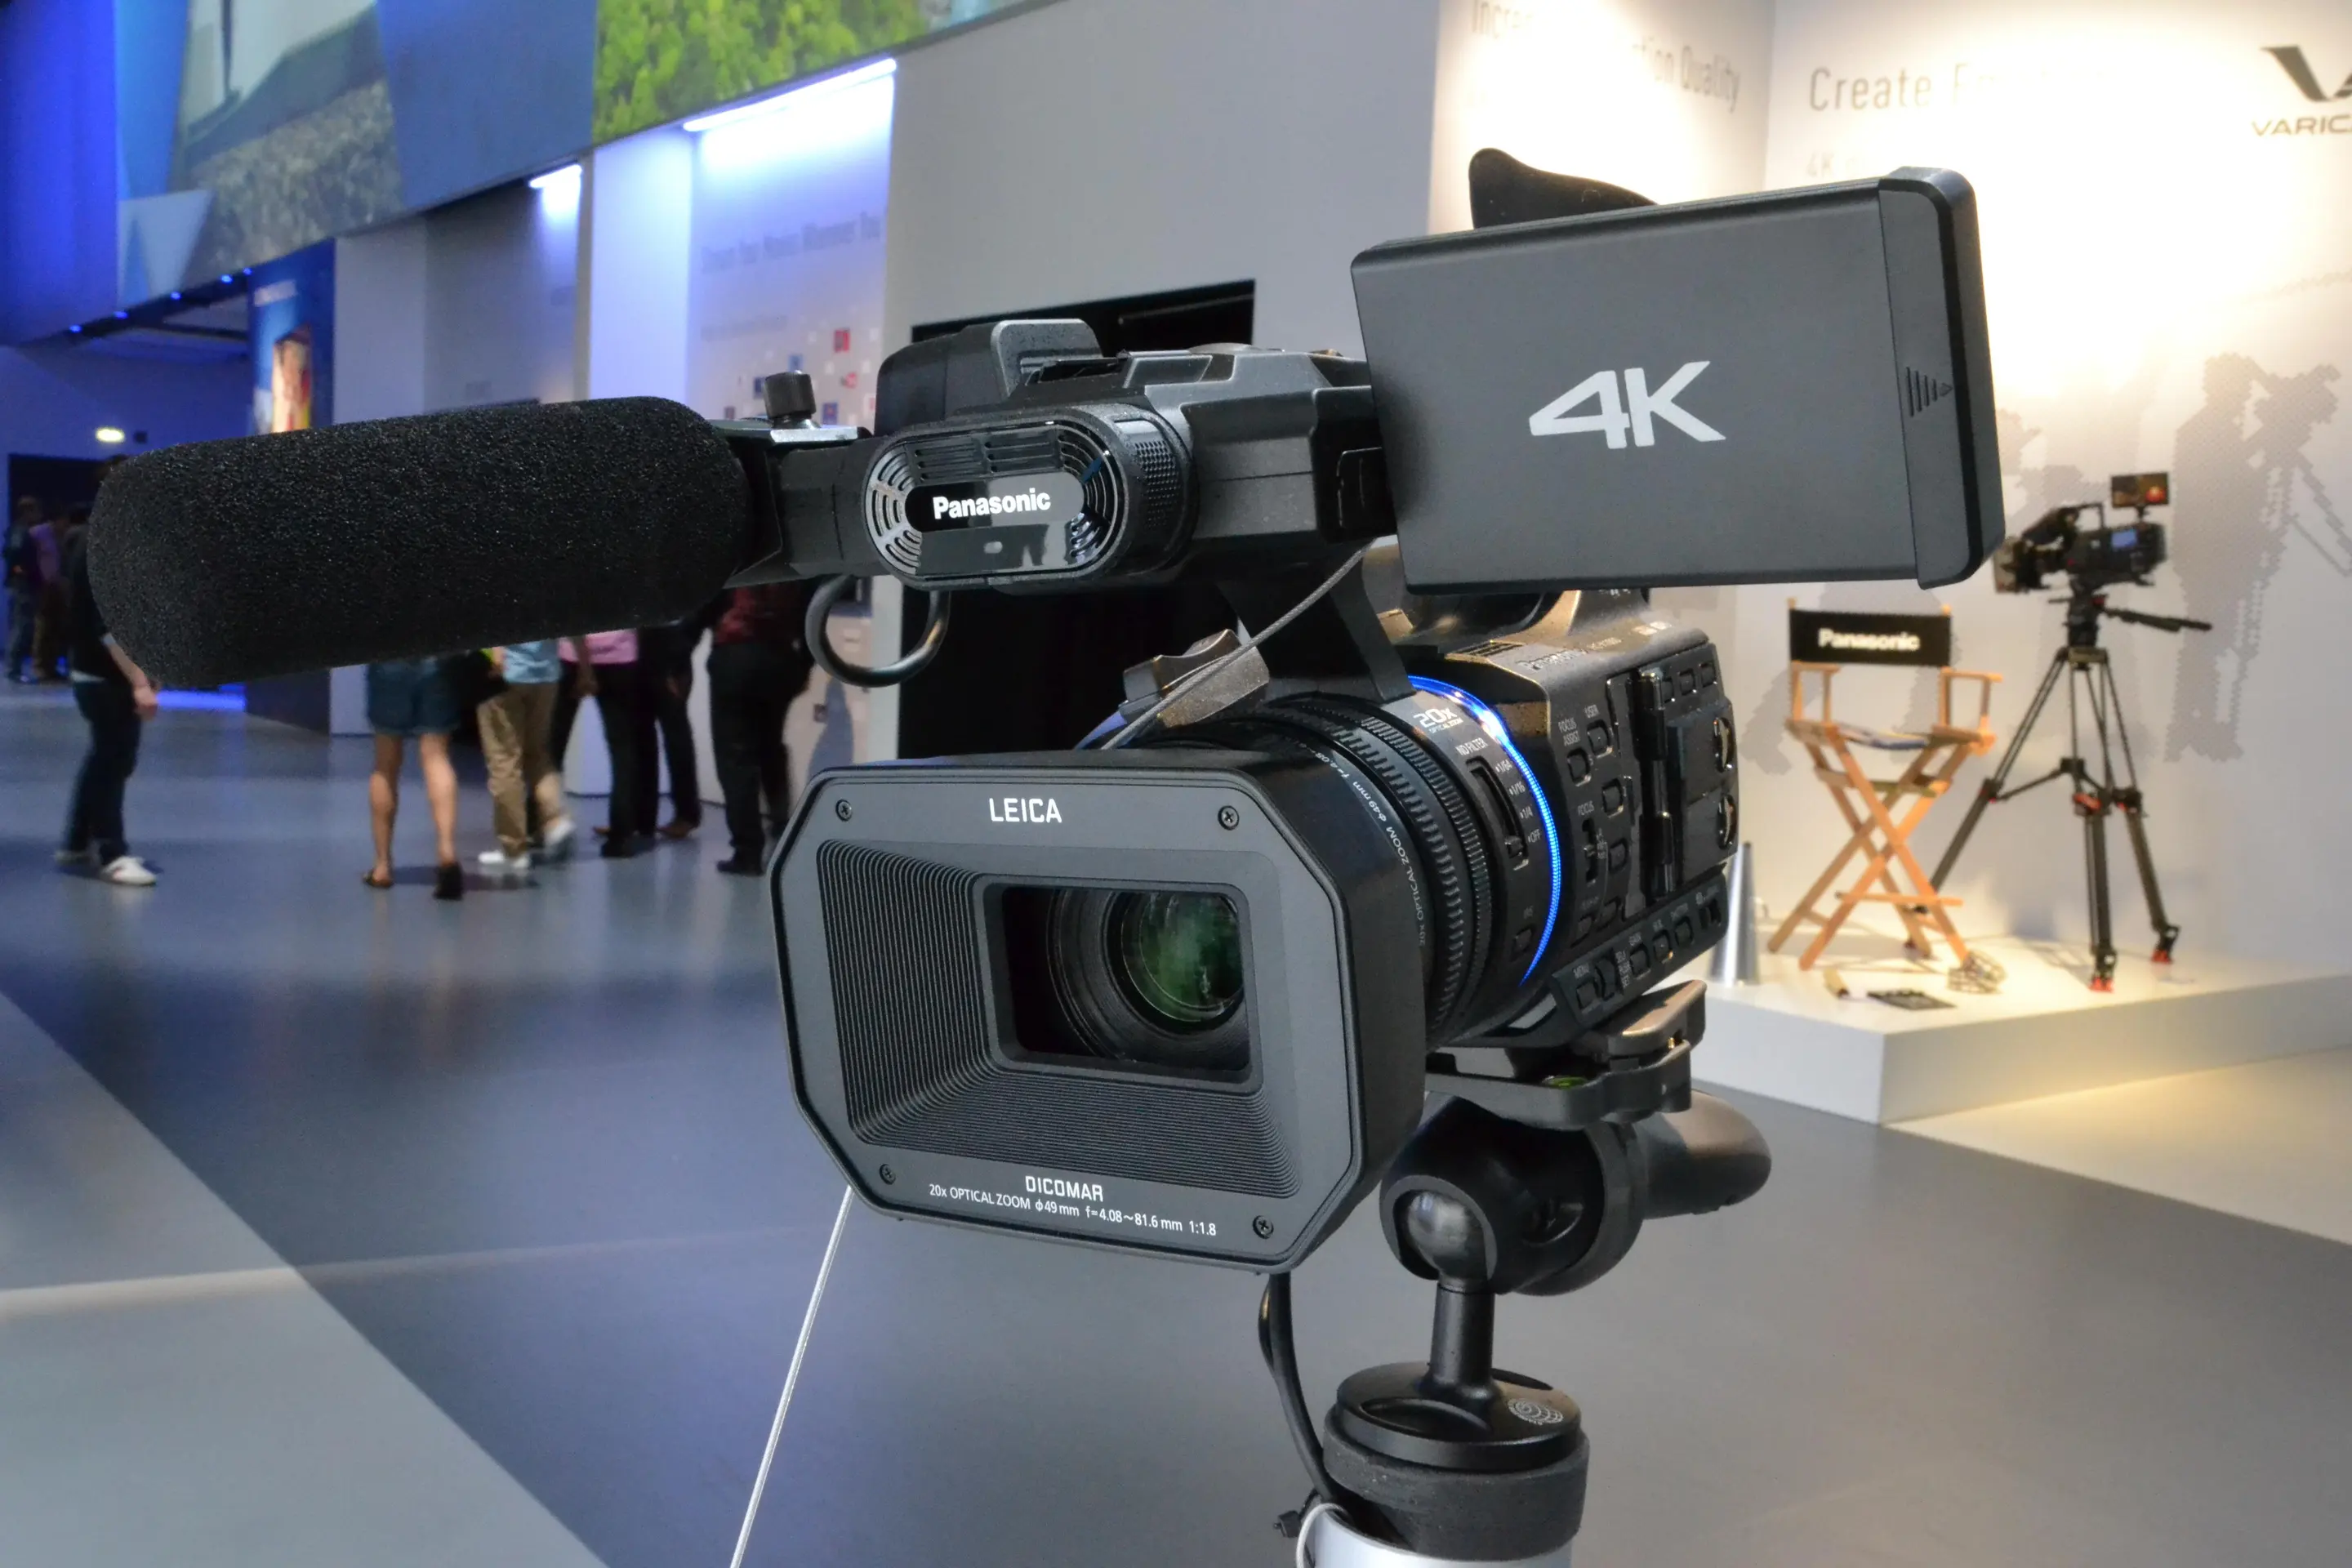 when-did-panasonic-release-the-hd-hc-x1000-4k-camcorder-in-the-usa